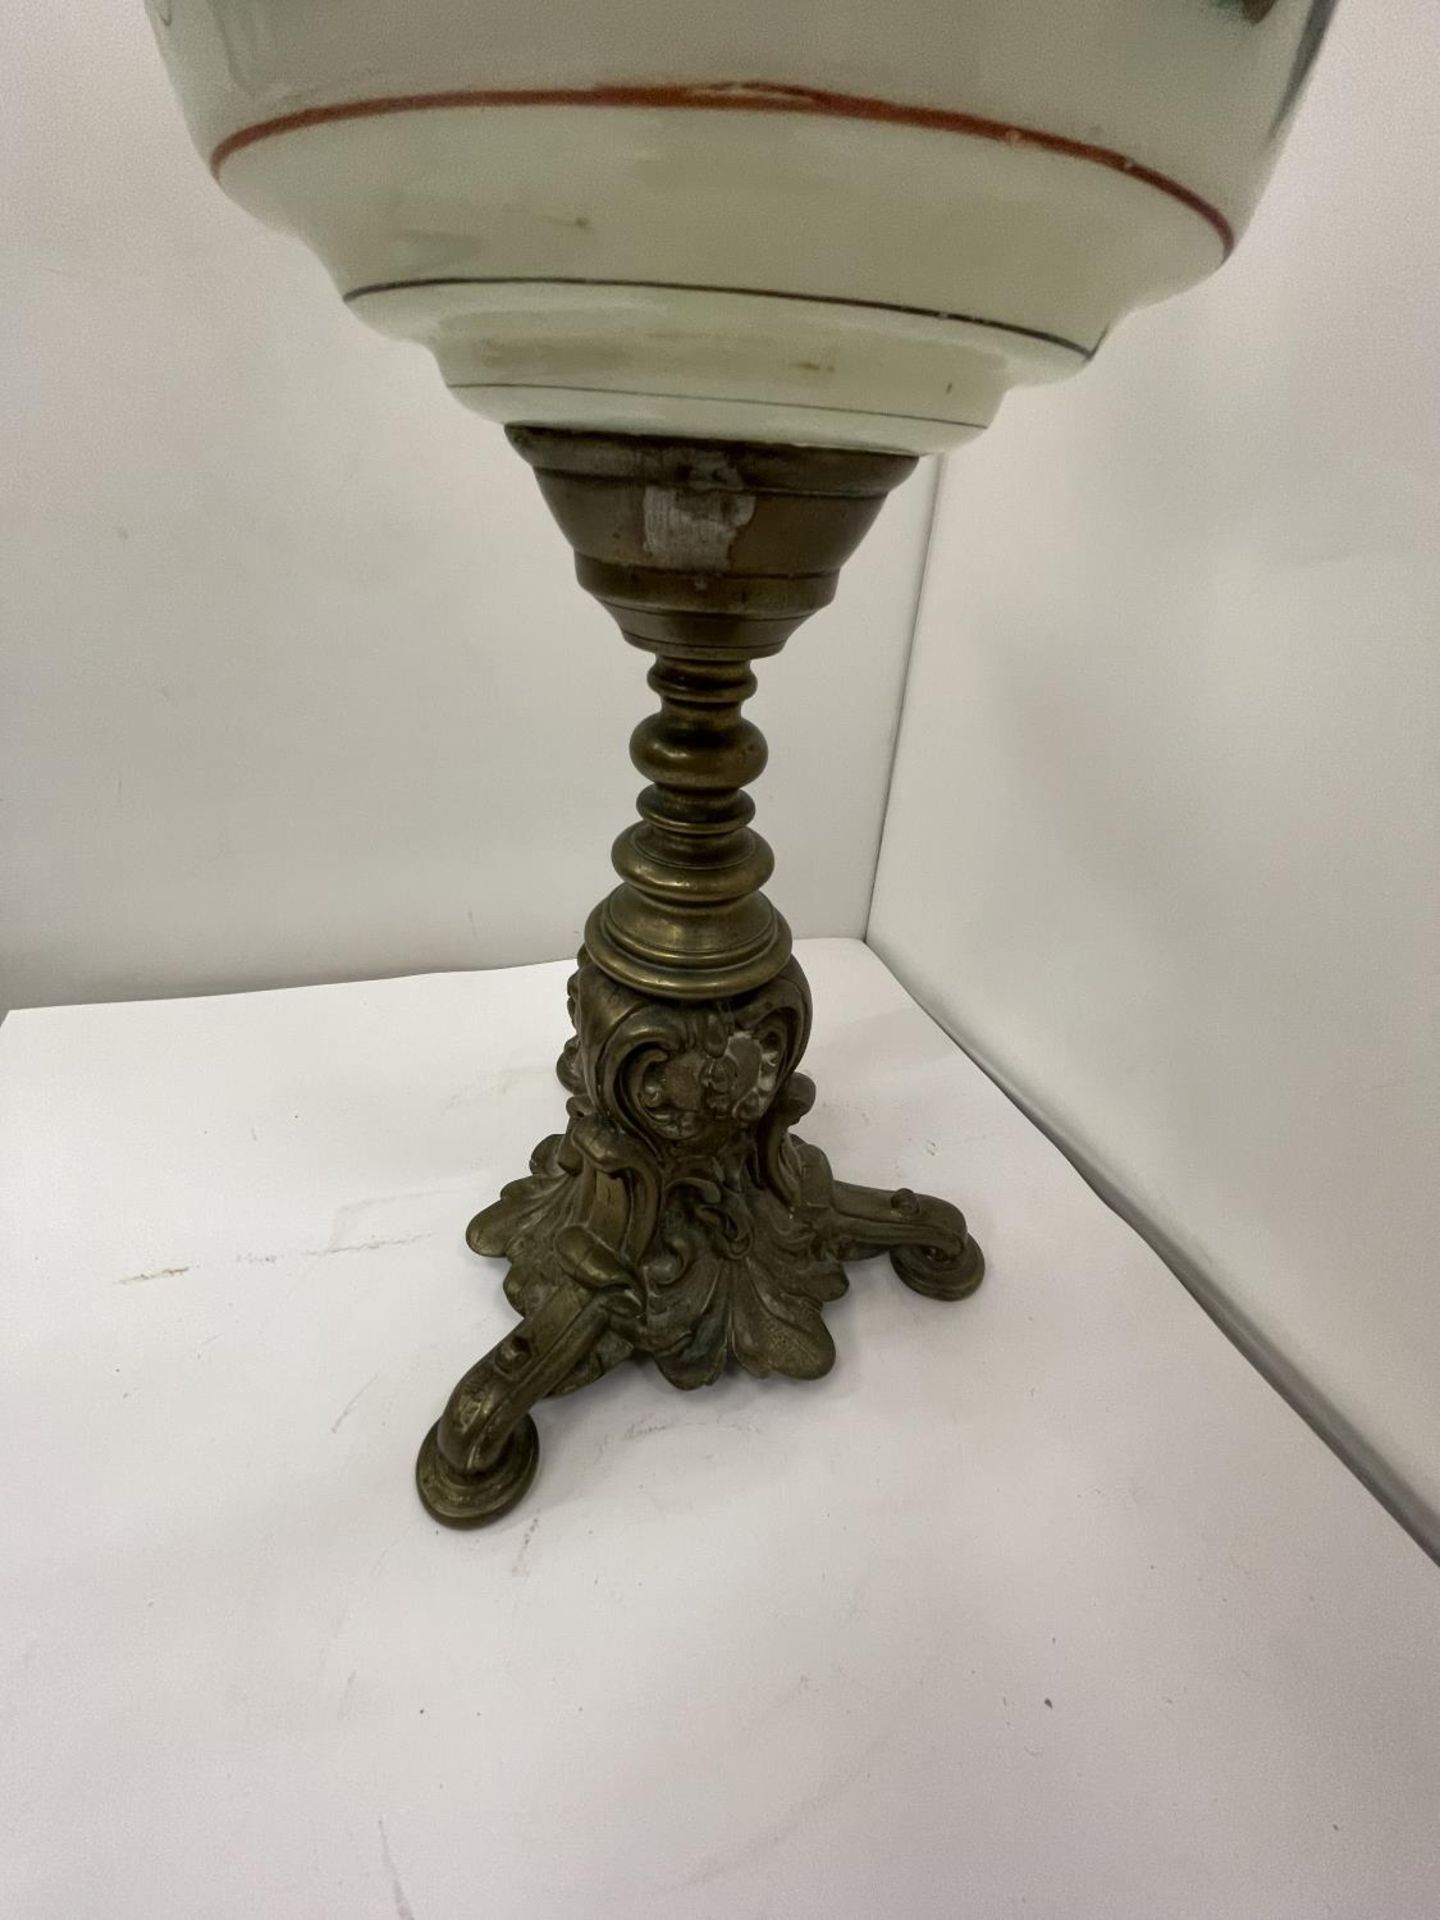 A BRASS OIL LAMP WITH DECORATIVE RESRVOIR, GLASS FUNNEL AND CRANBERRY GLASS SHADE - Image 5 of 5